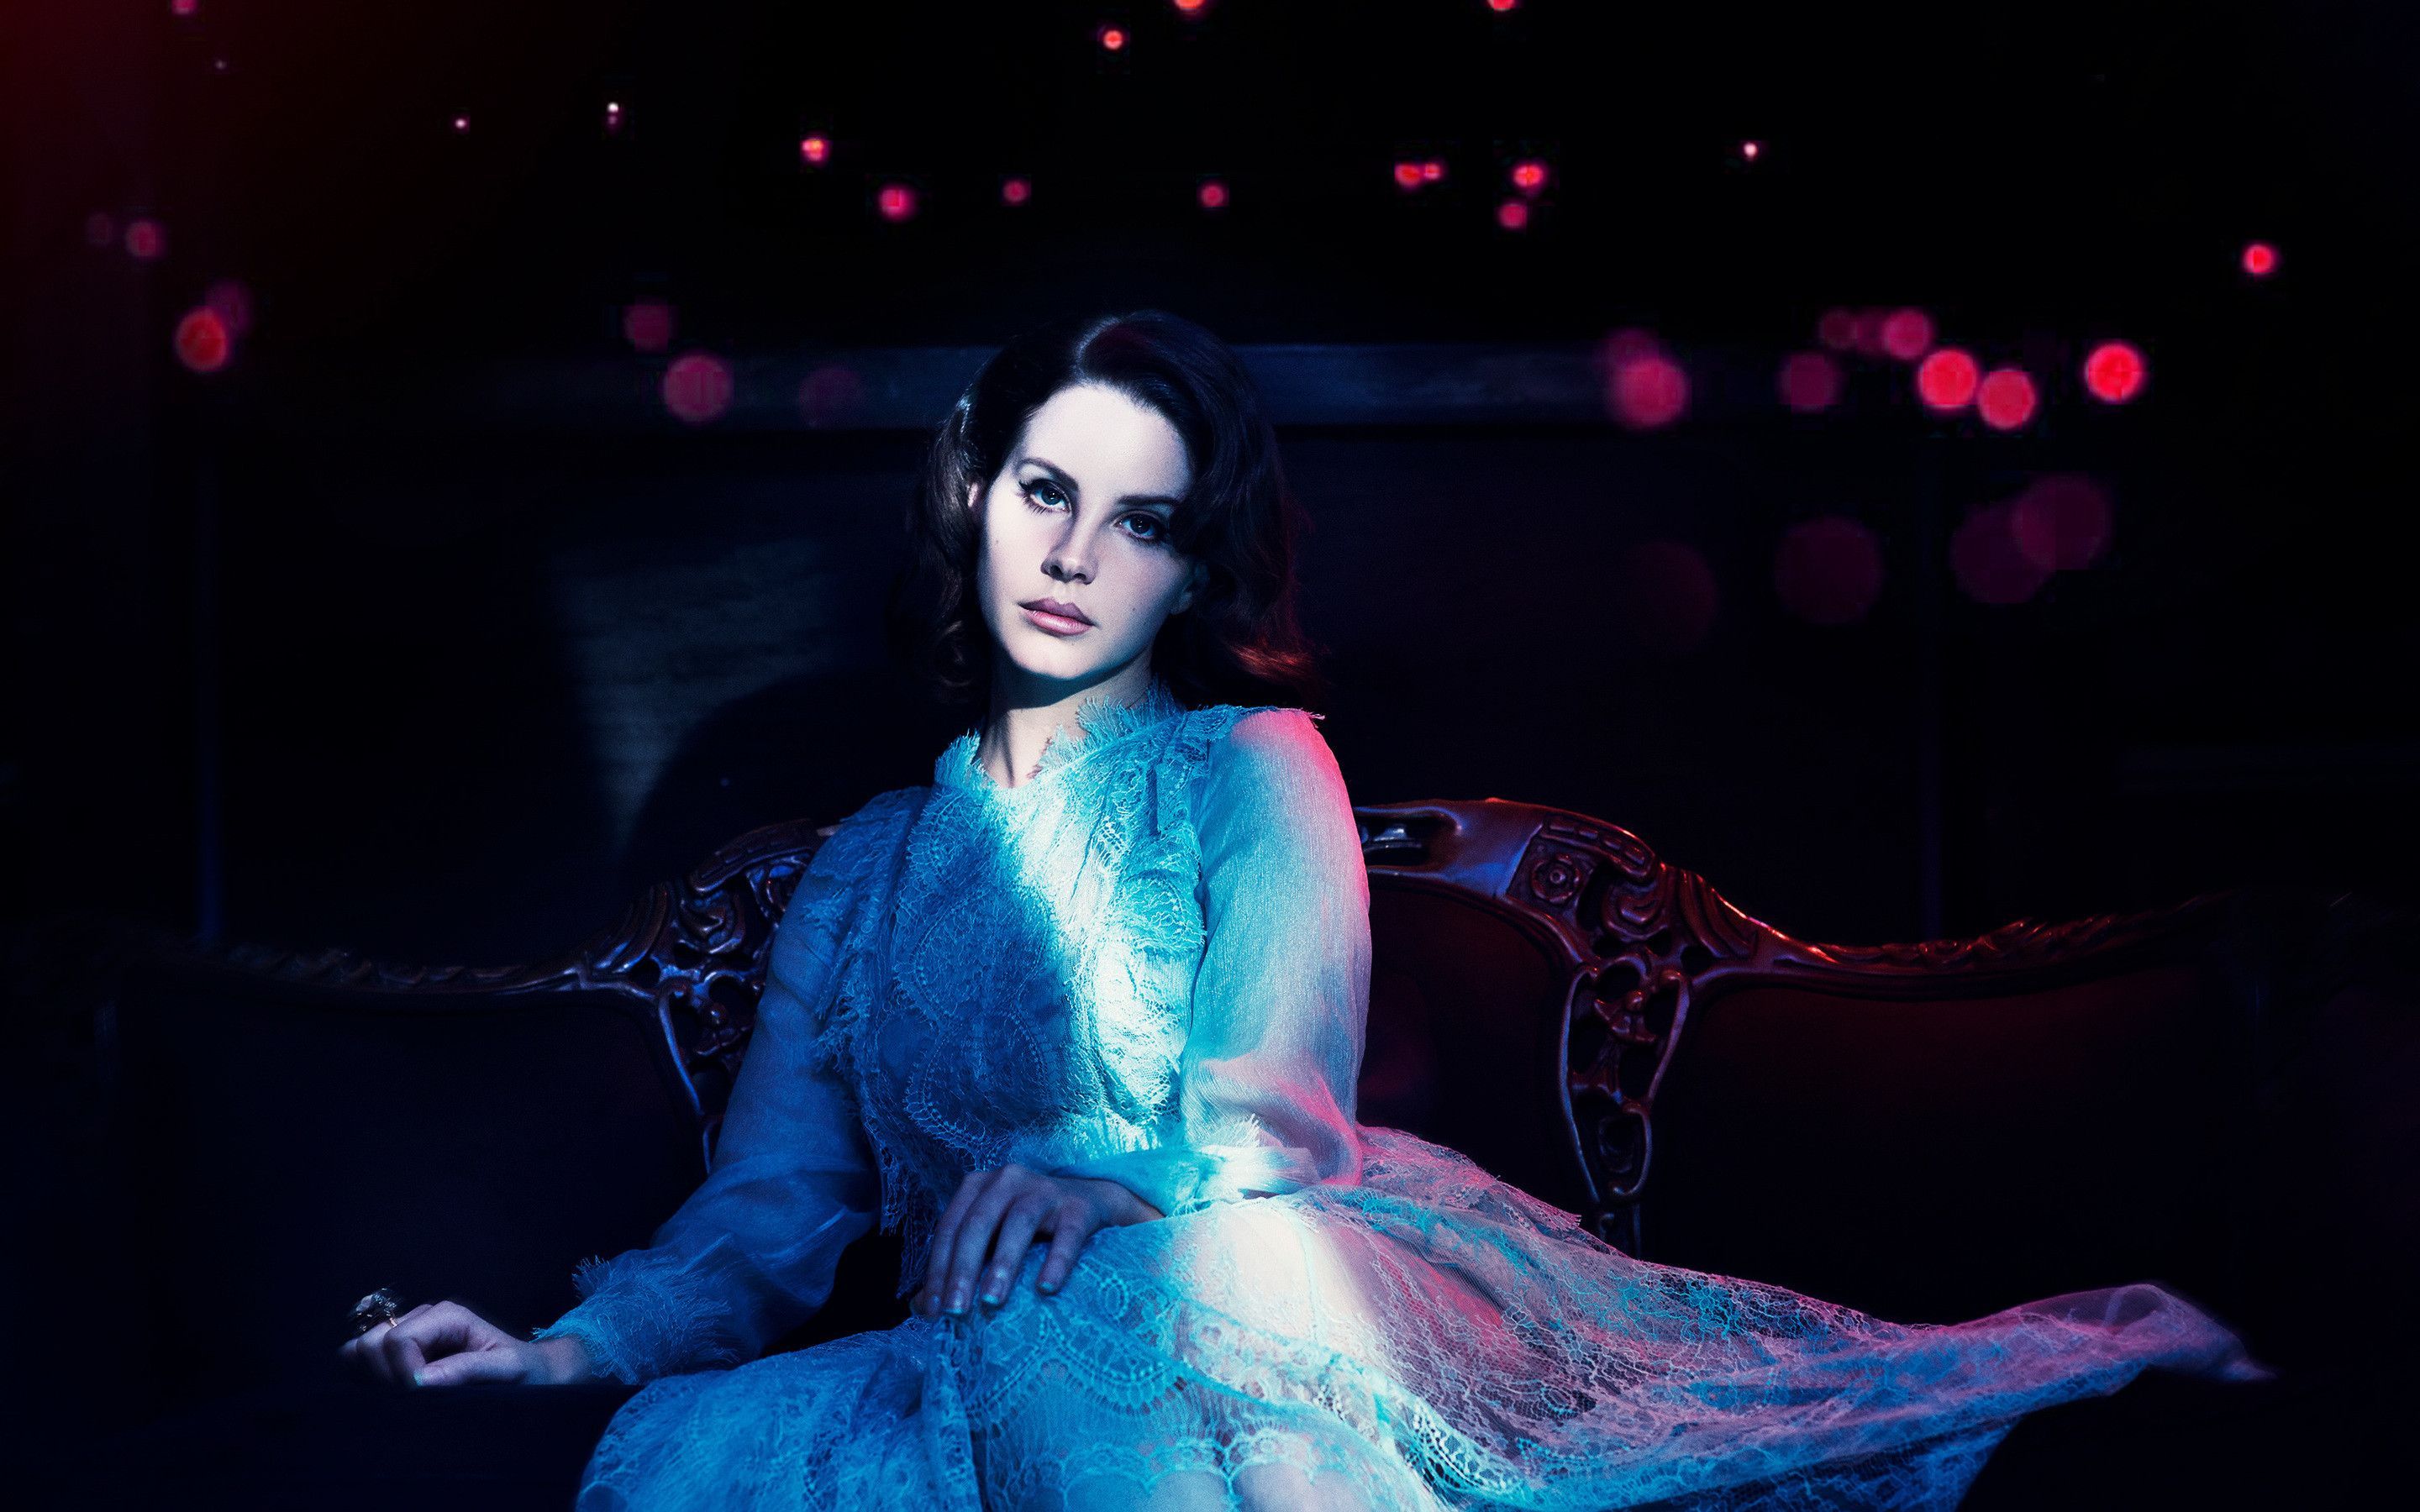 A woman in a blue dress sitting on a couch - Lana Del Rey